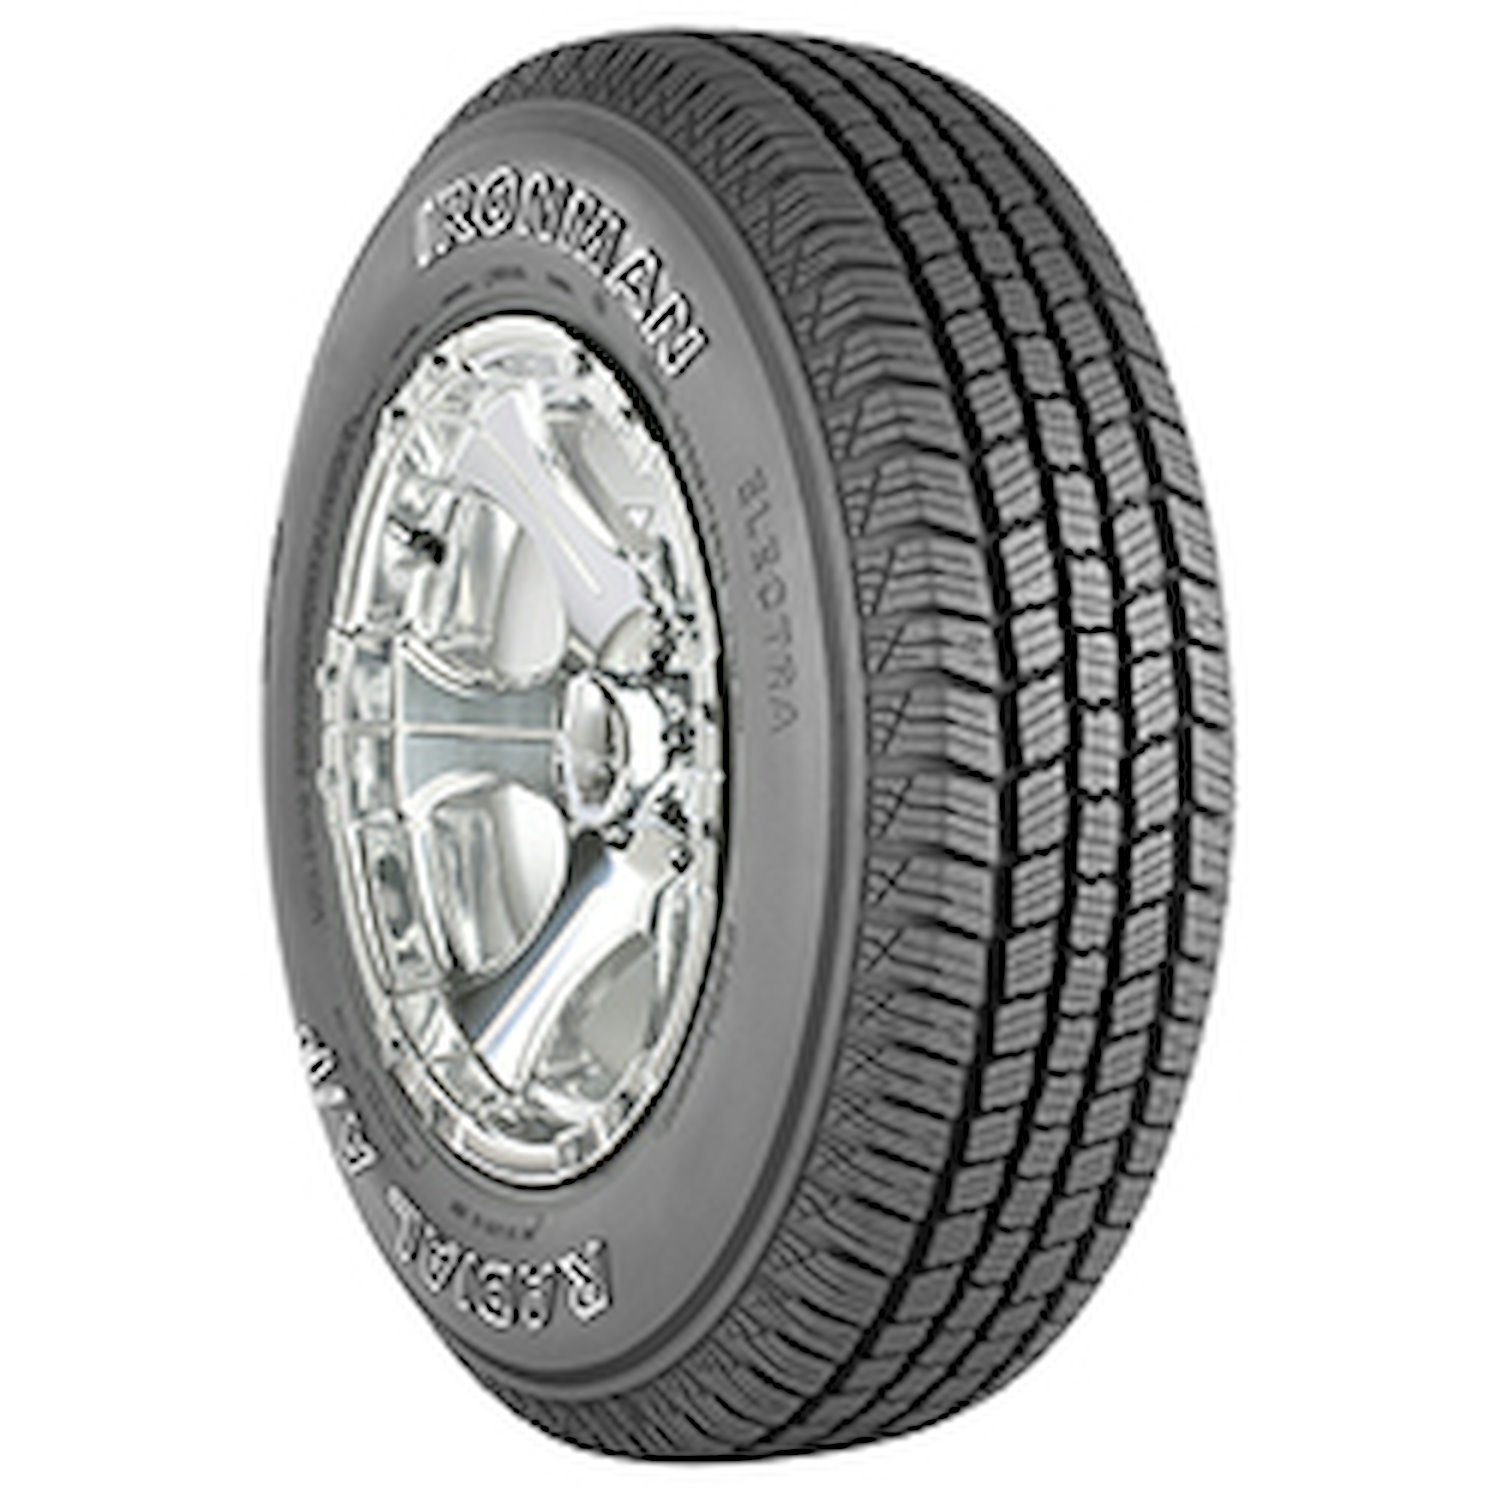 Radial A/P Tire, 265/70R17 115T